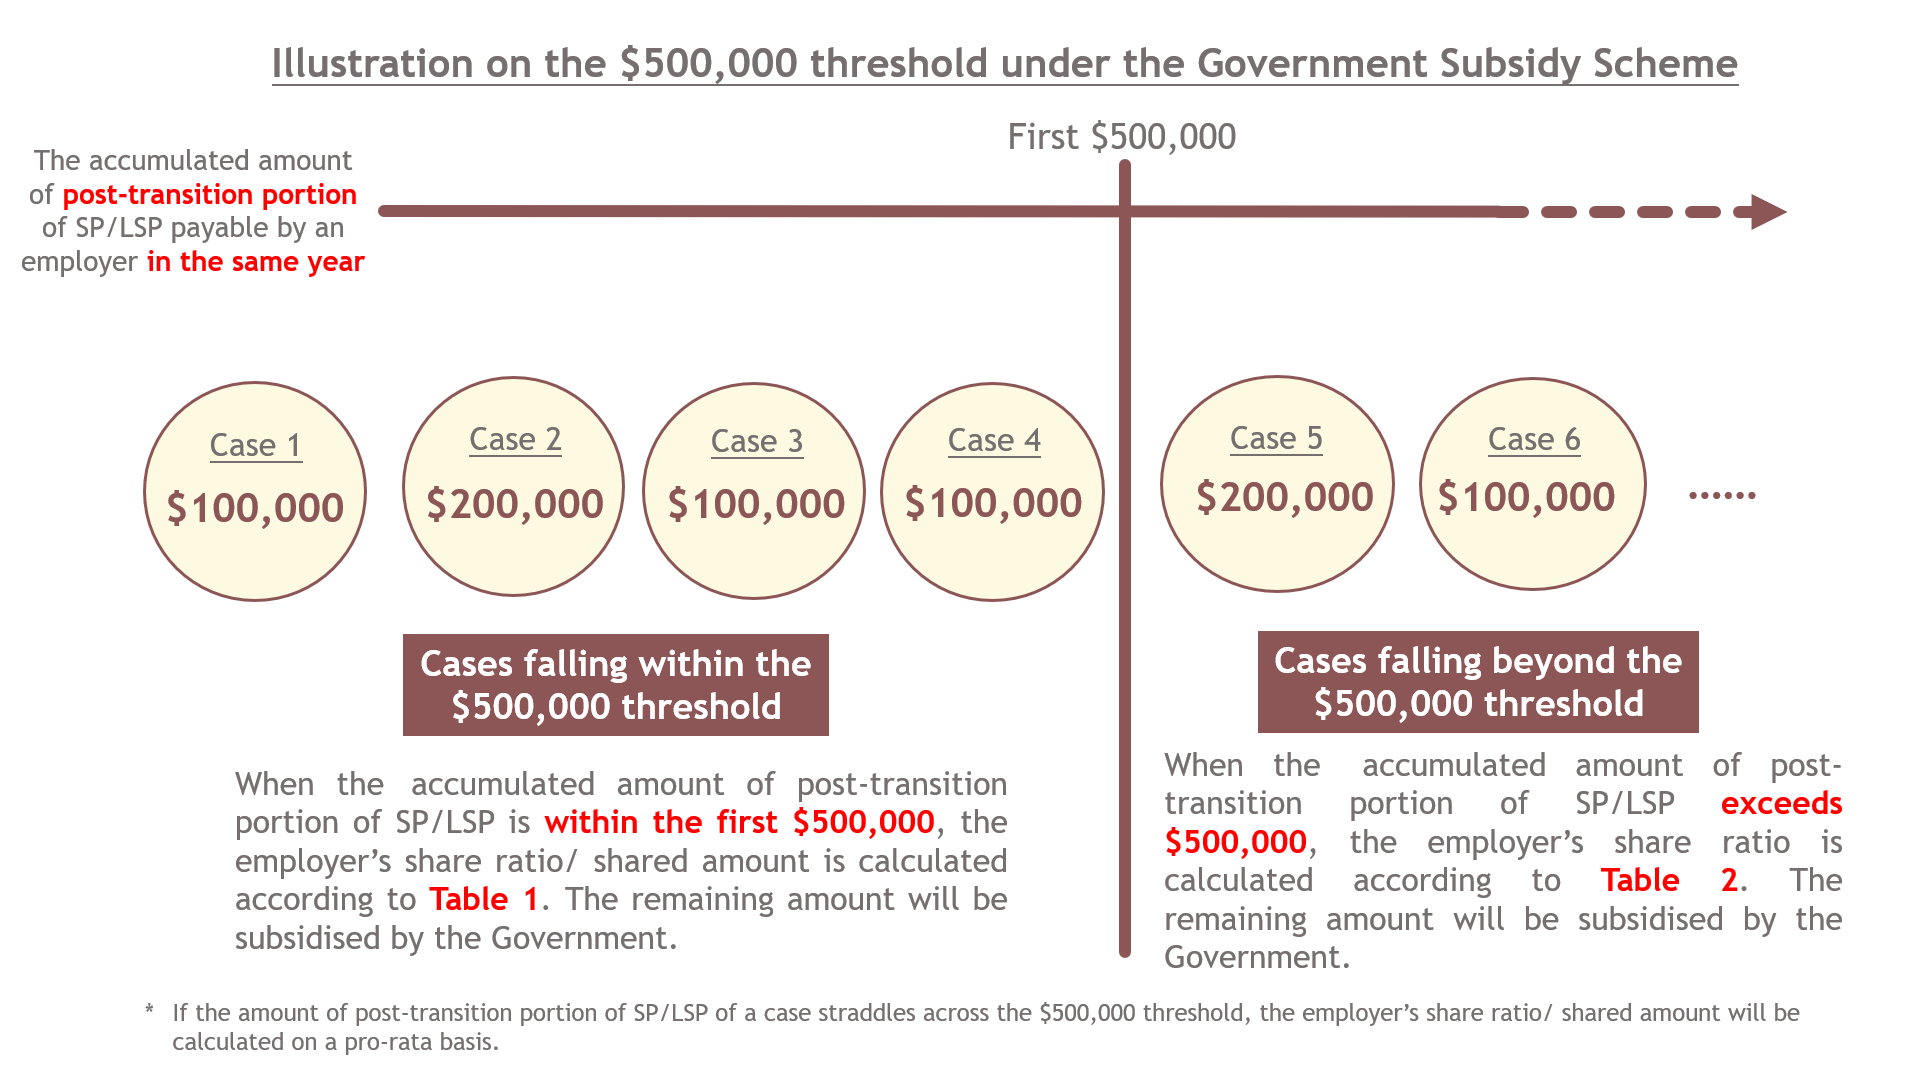 How to determine whether a case falls within the $500,000 threshold - example